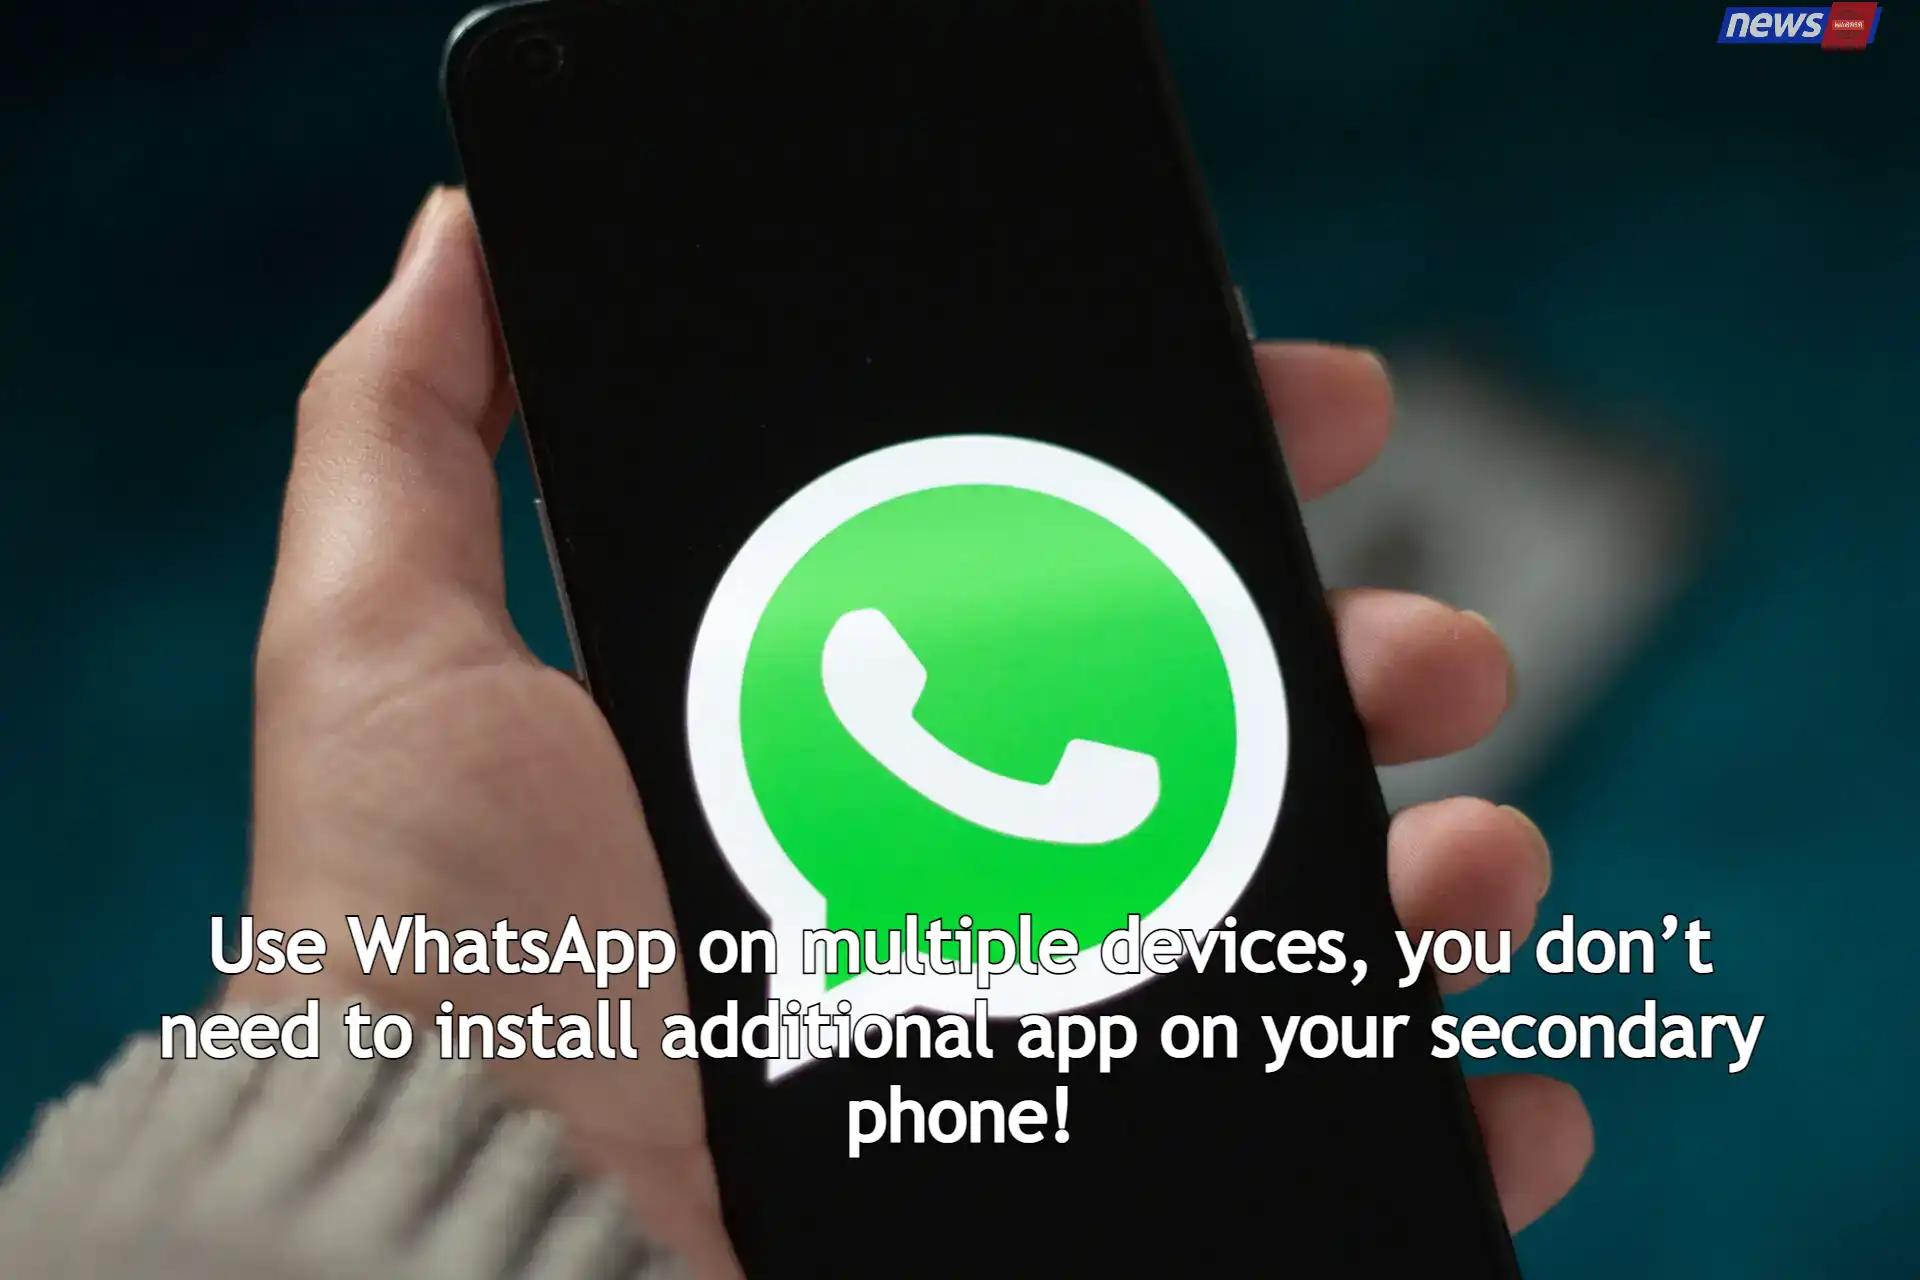 Use WhatsApp on multiple devices, you don’t need to install additional app on your secondary phone!